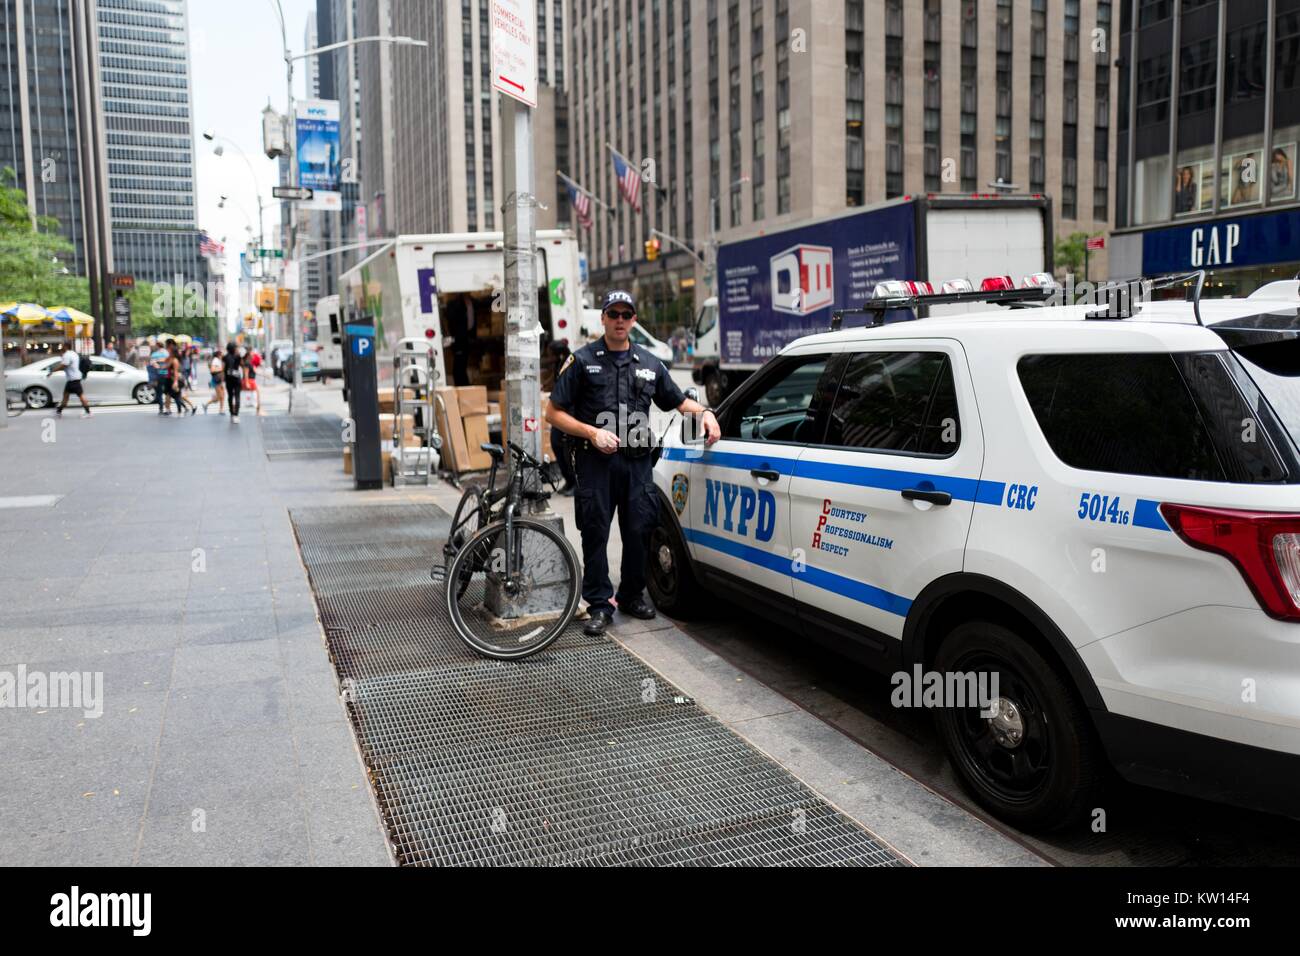 A New York Police Department counter-terrorism officer stands at the ready, while his fellow officer sits in a police vehicle, on 6th Avenue, Manhattan, New York City, New York, July, 2016. Stock Photo